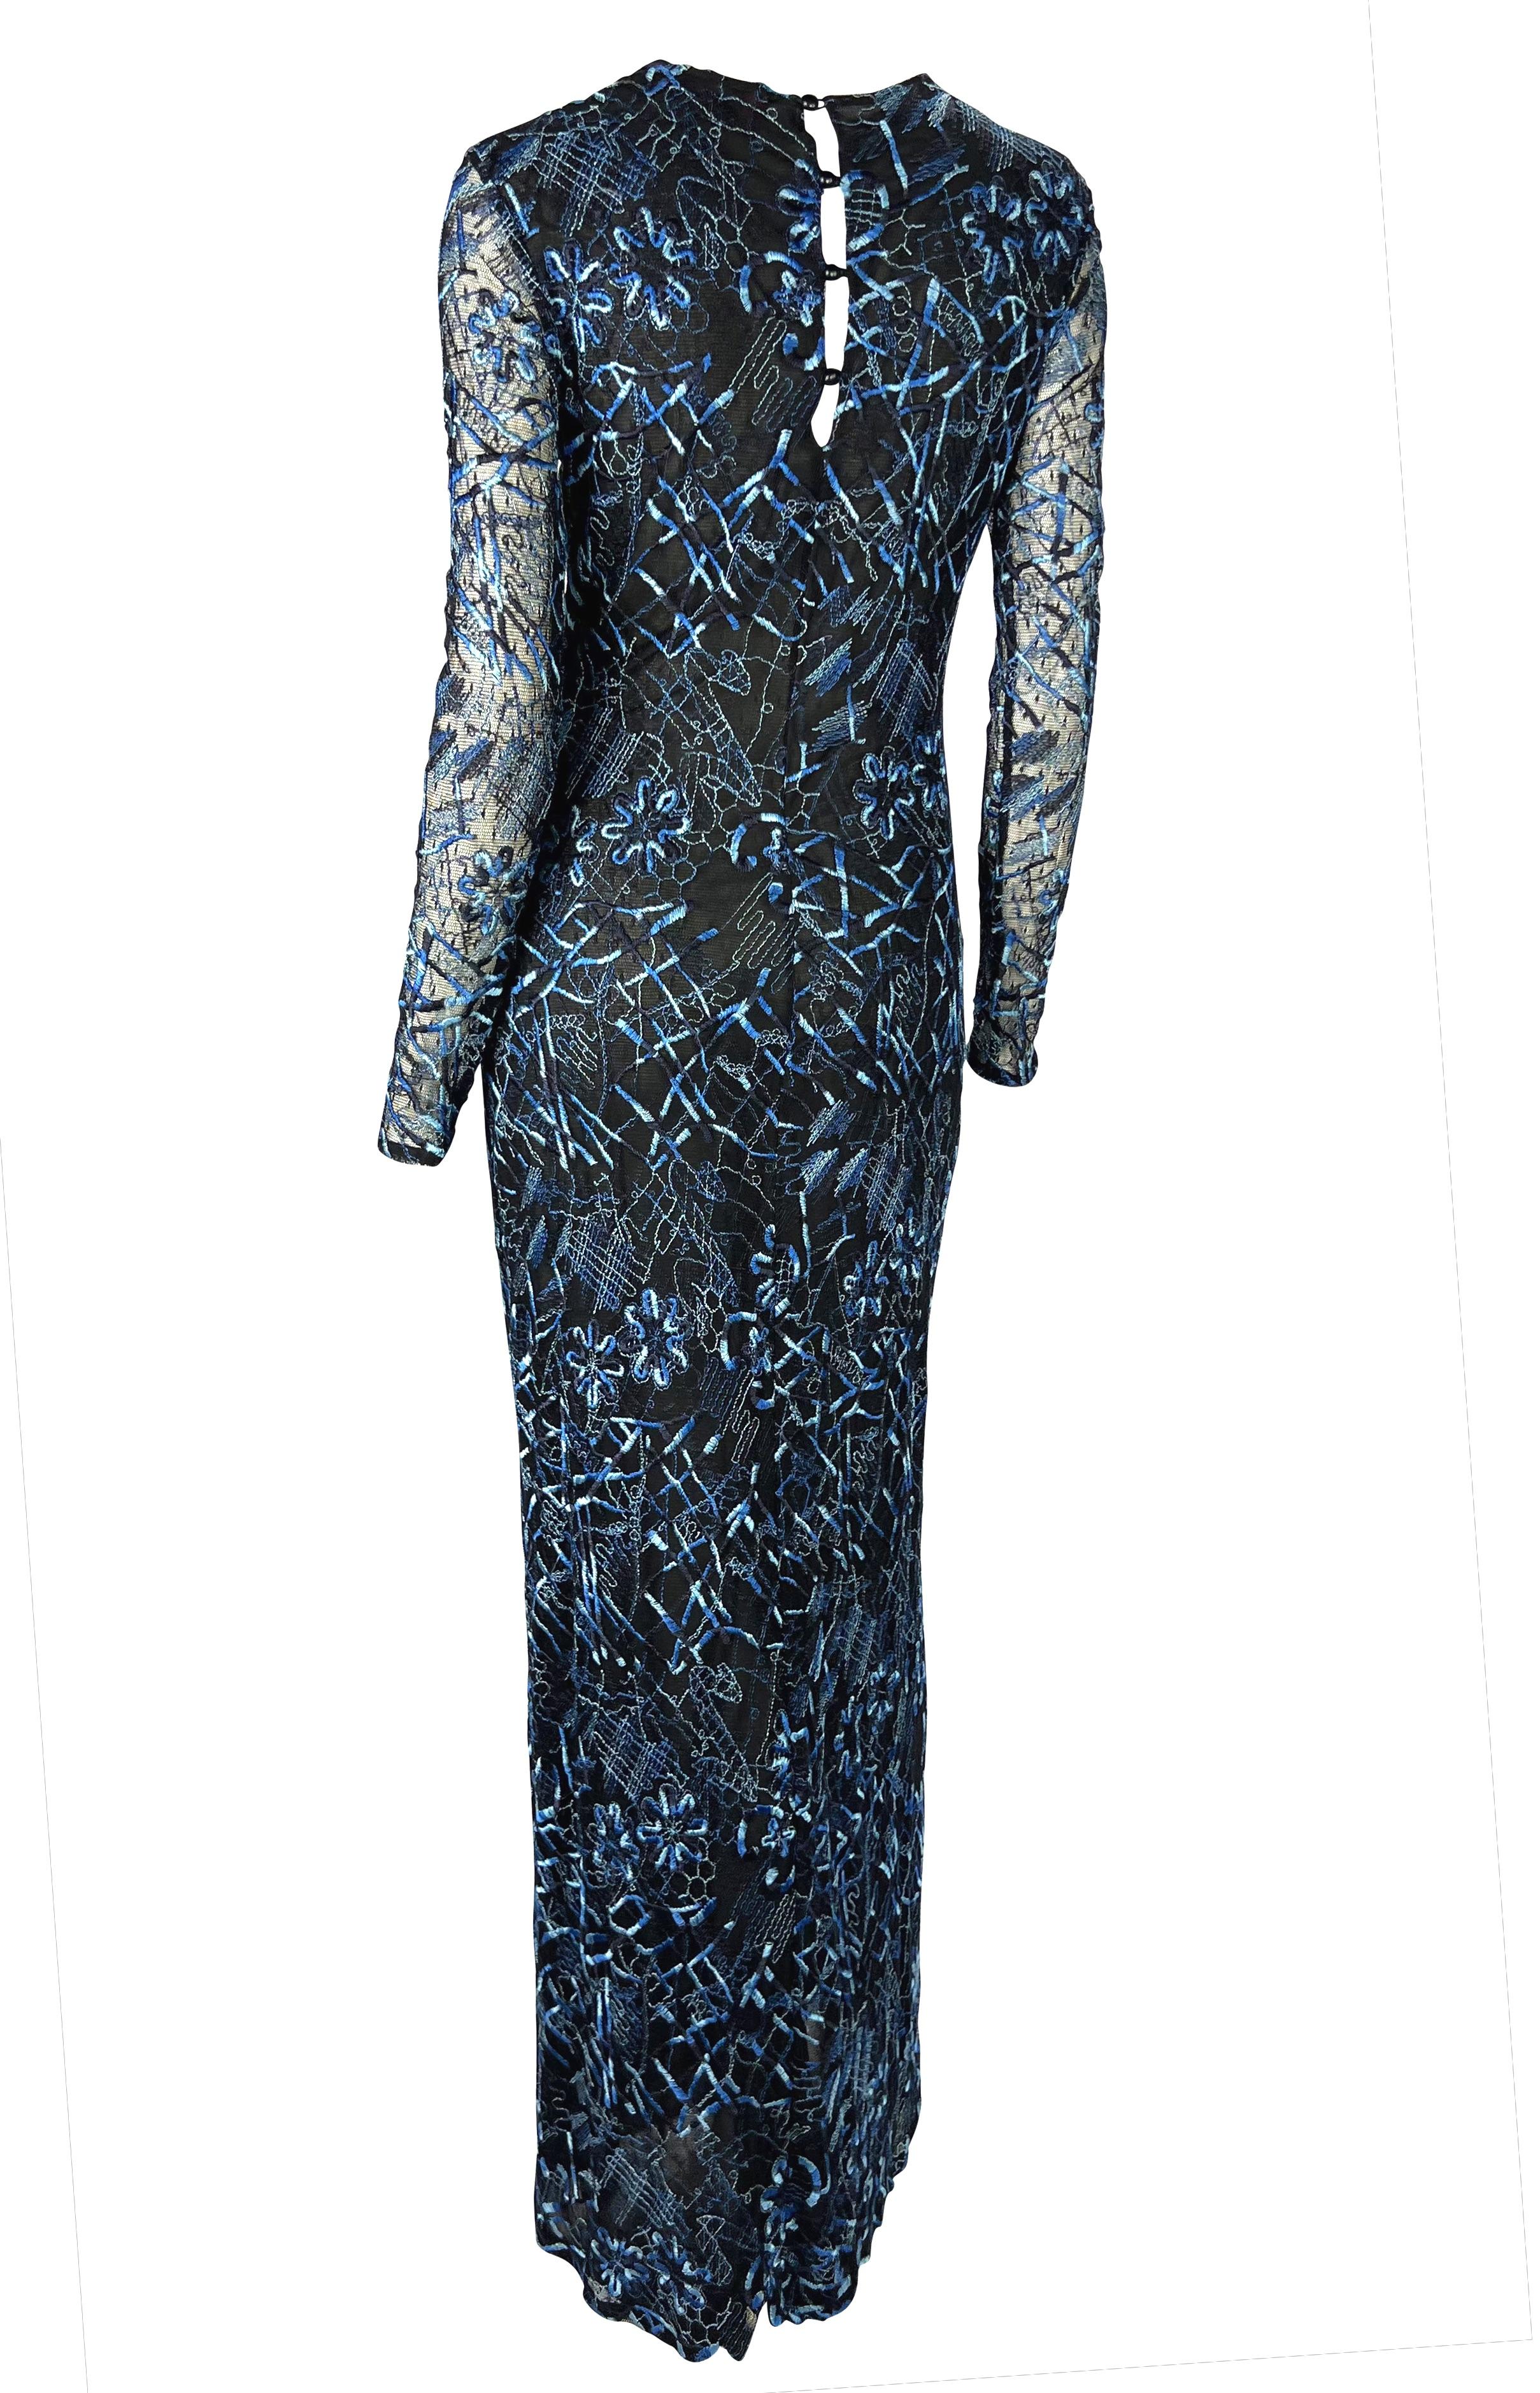 S/S 1998 Christian Lacroix Black Stretch Sheer Mesh Blue Embroidered Maxi Dress For Sale 1